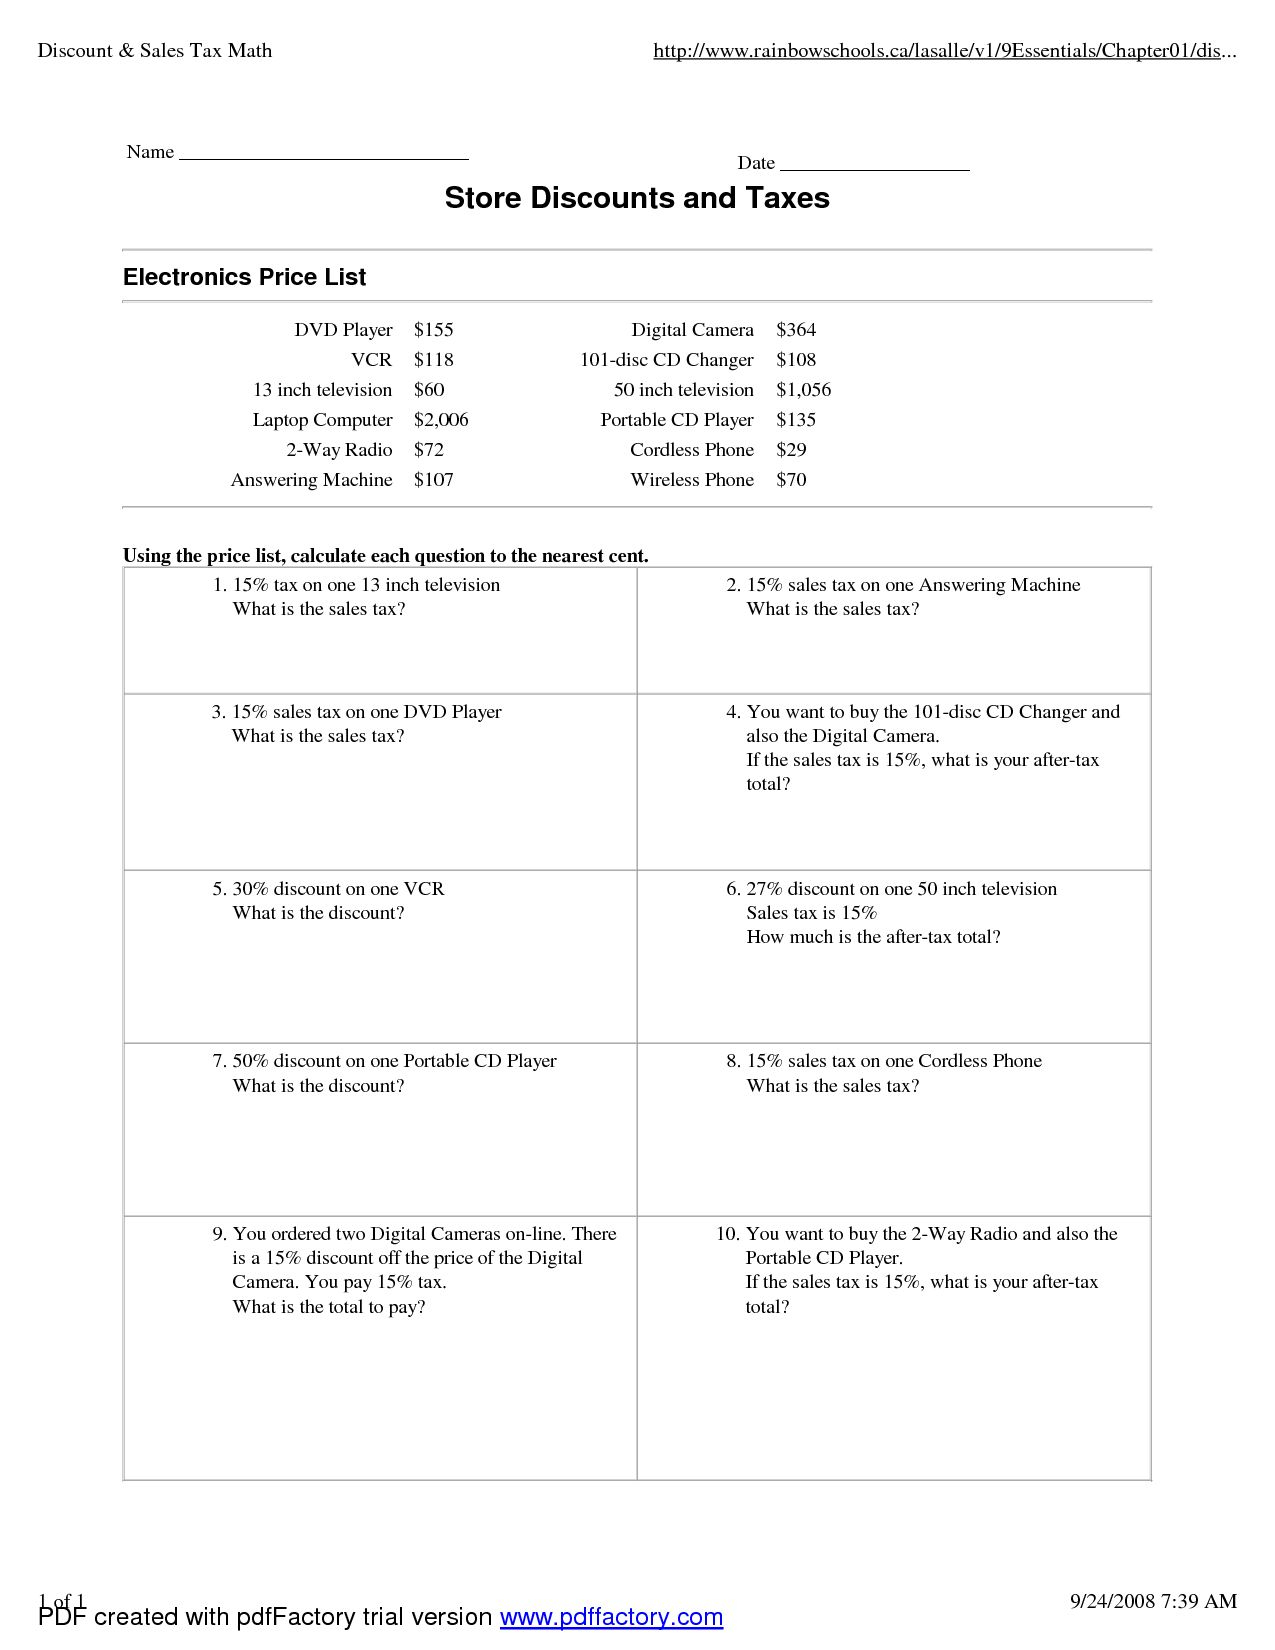 Markups And Markdowns Word Problems Matching Worksheet Answers | db